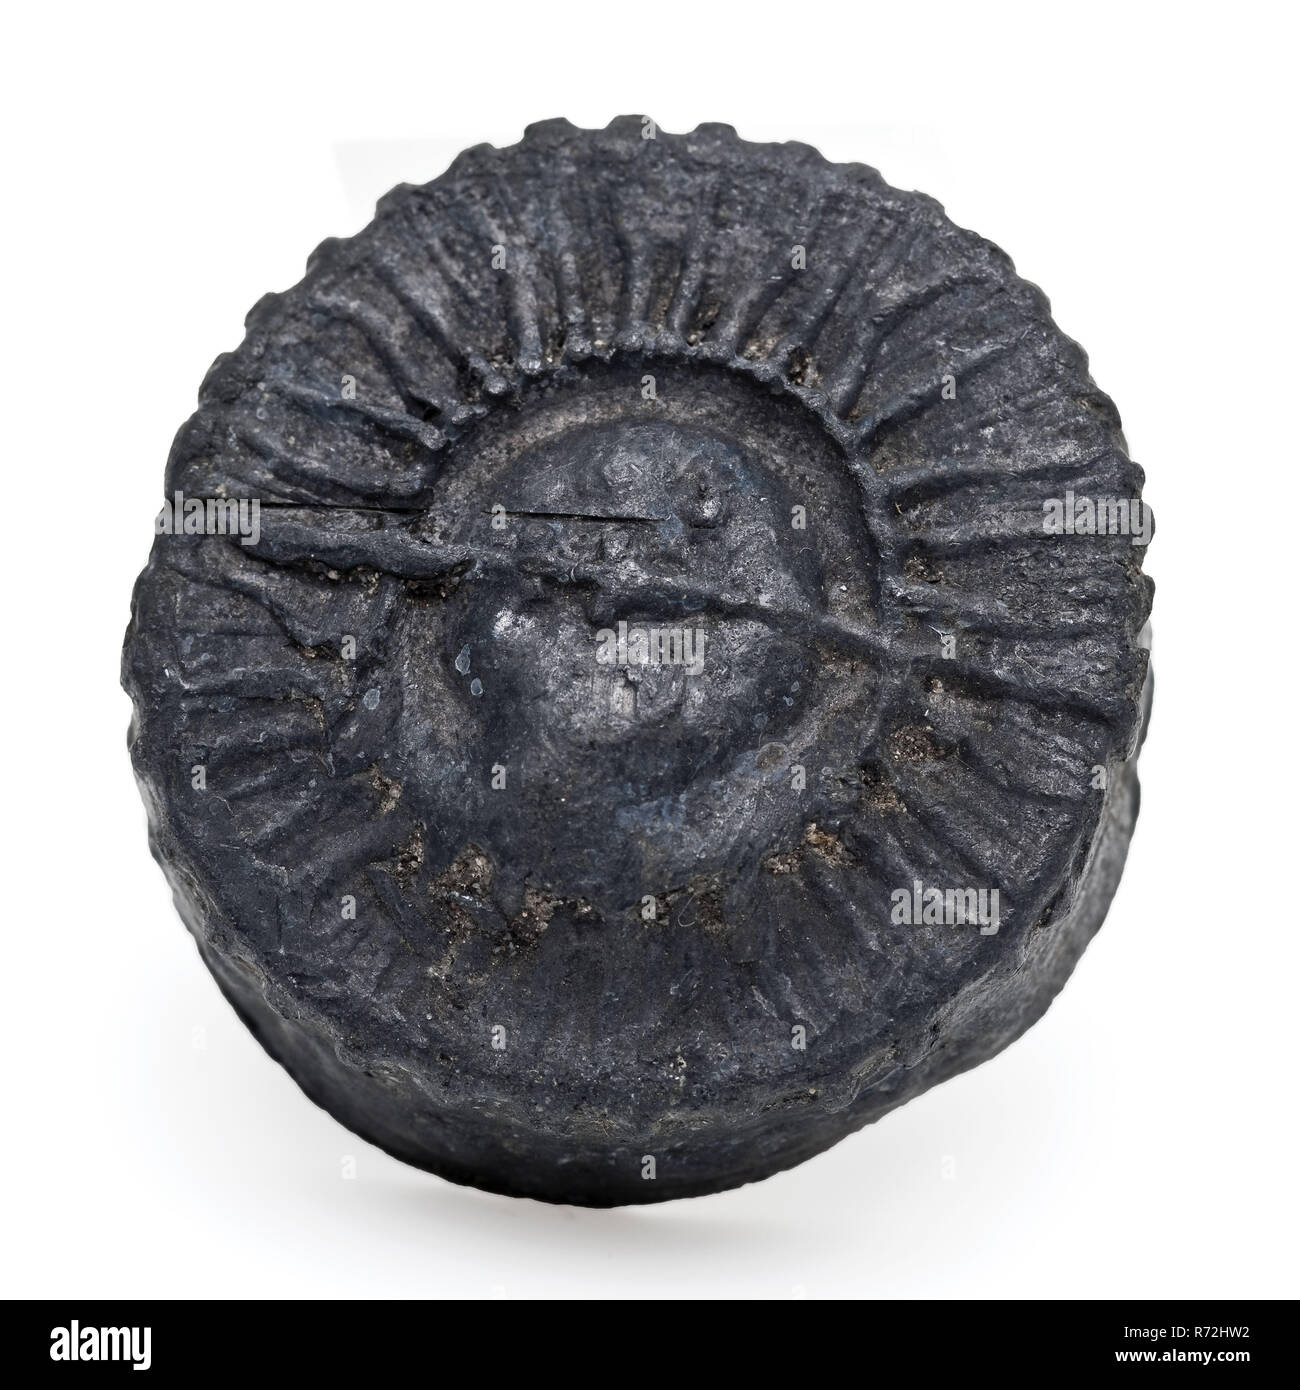 Pewter or lead cap with moon face in halo and text, lid closure holder soil find souvenir tin lead metal, die-cast Cap with raised edge Decorated with moon view inside halo. Along the edge with cast text Probably cap of reliquary text on the edge: ORVIBTANO *** O DI ROMA archeology Rotterdam rail tunnel packaging store souvenir Soil discovery: trajectory rail tunnel Rotterdam. Stock Photo